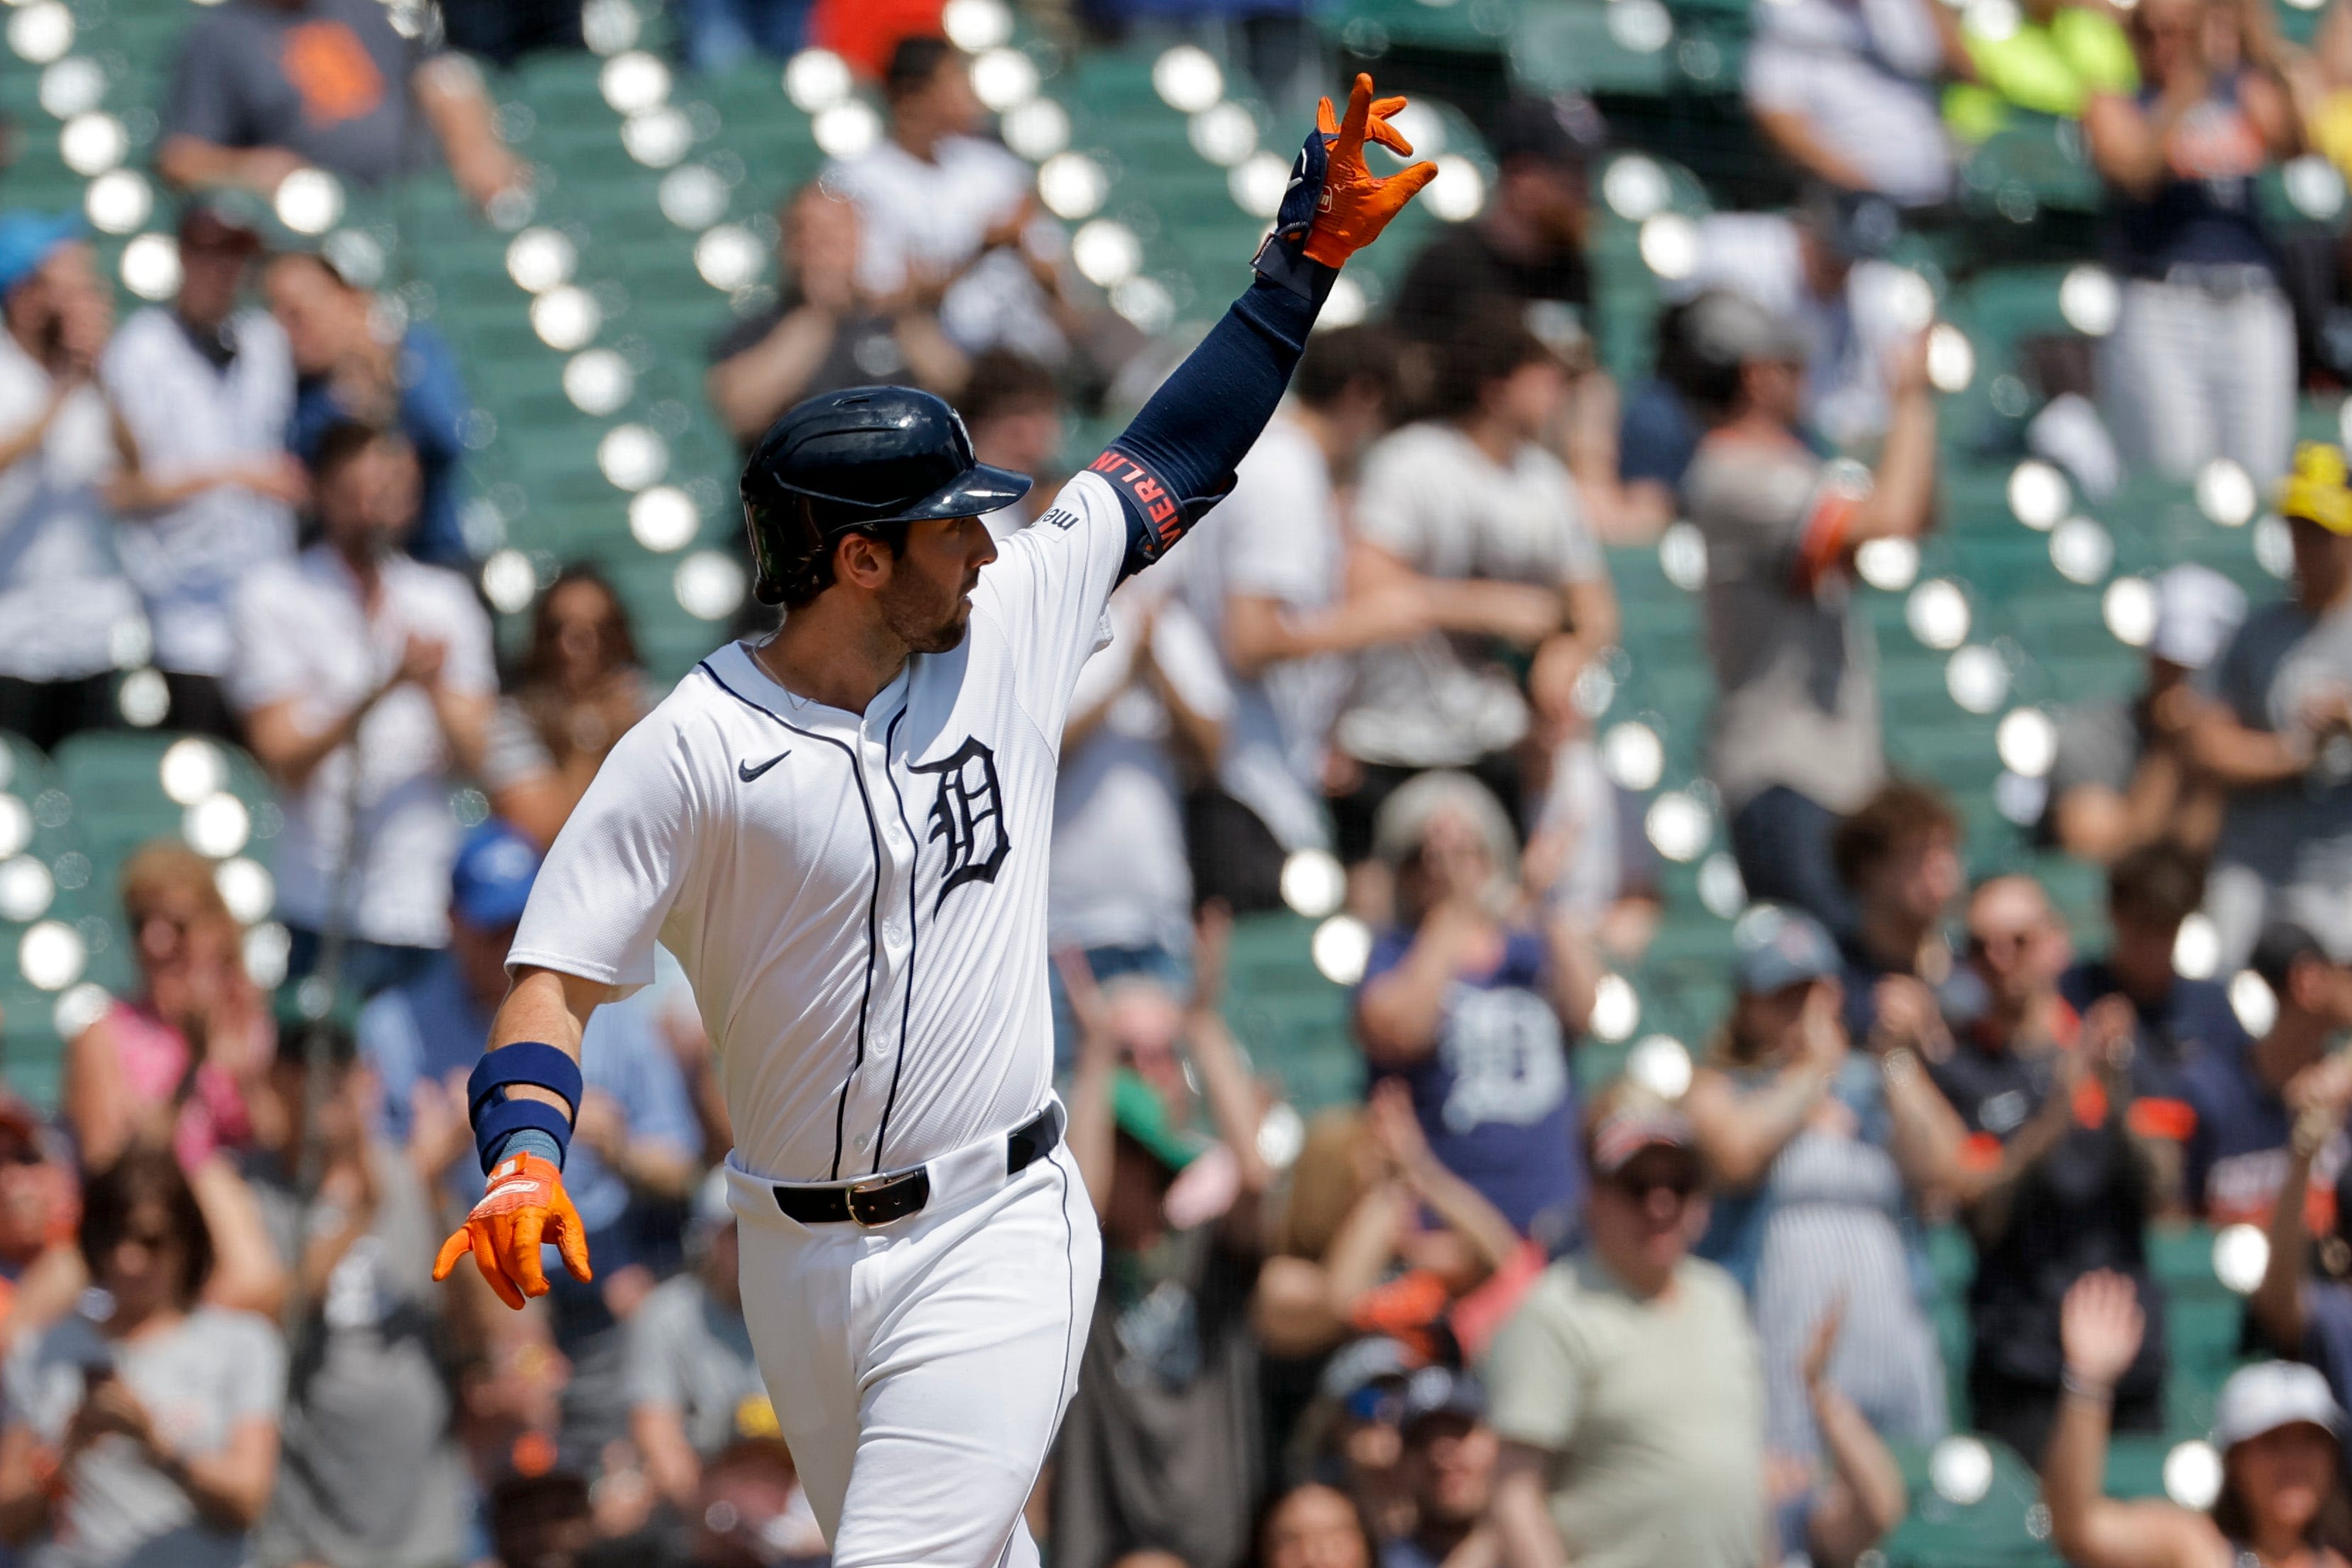 Detroit Tigers open May with Matt Vierling blast, 4-1 victory over St. Louis Cardinals